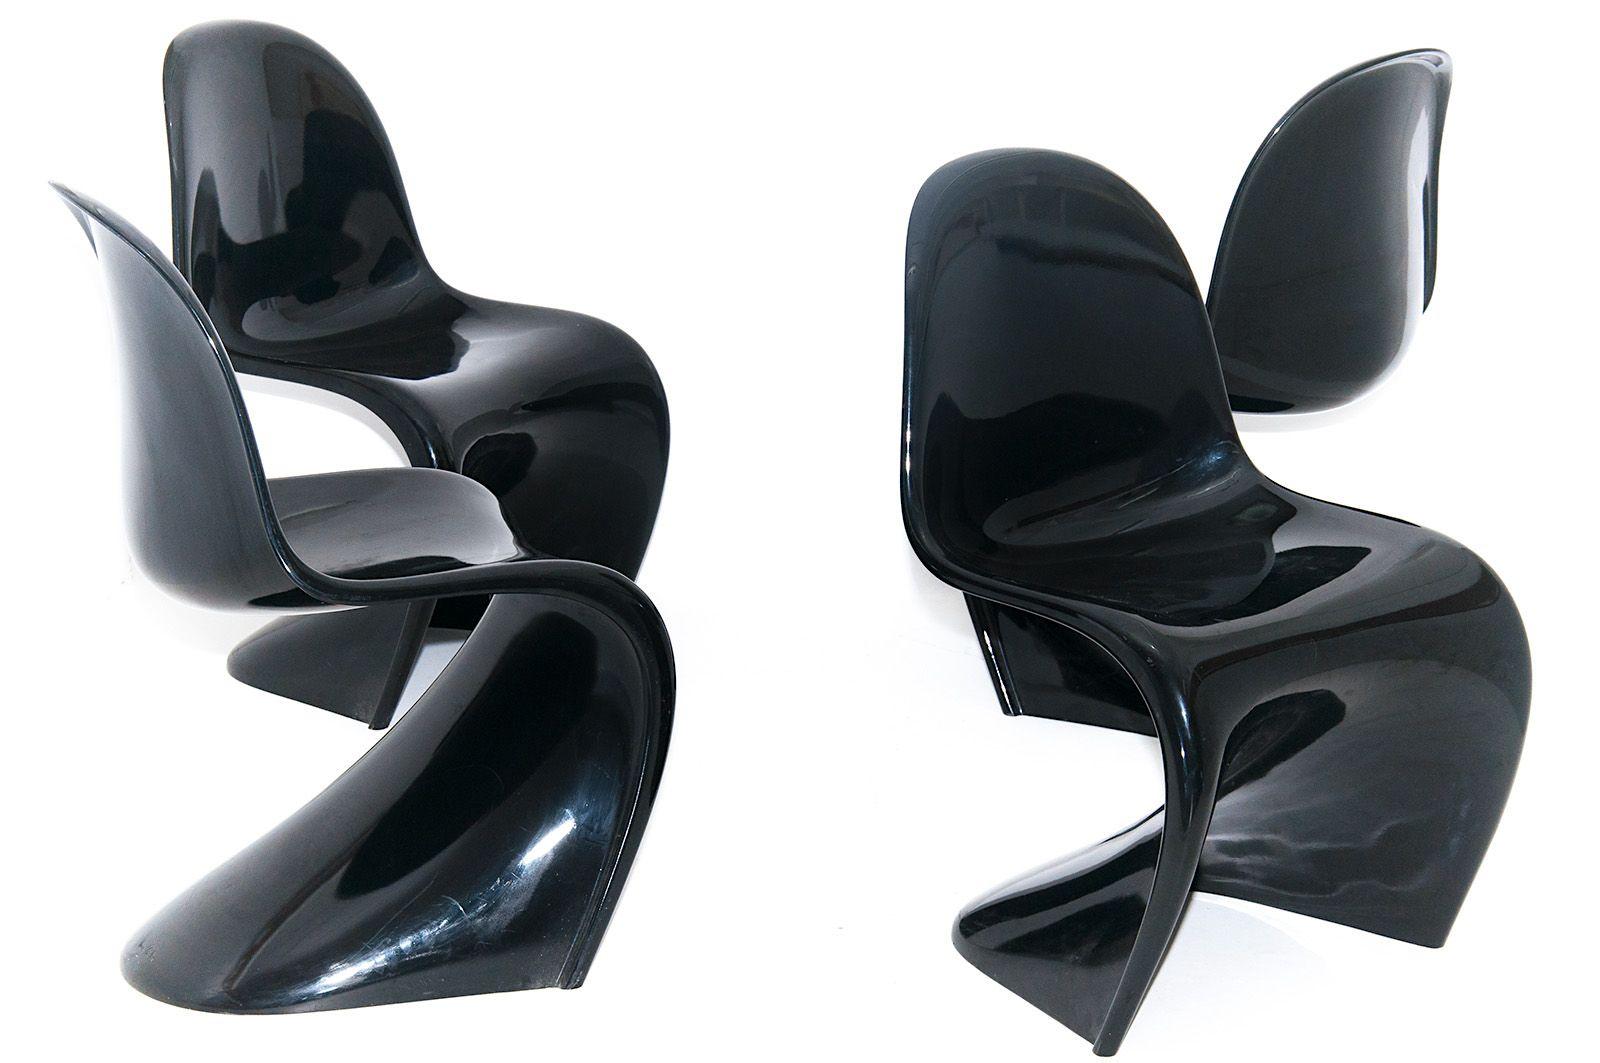 Fiberglass Vitra, Panton Classic Chairs, by Verner Panton, Black Lacquered, Set of Four